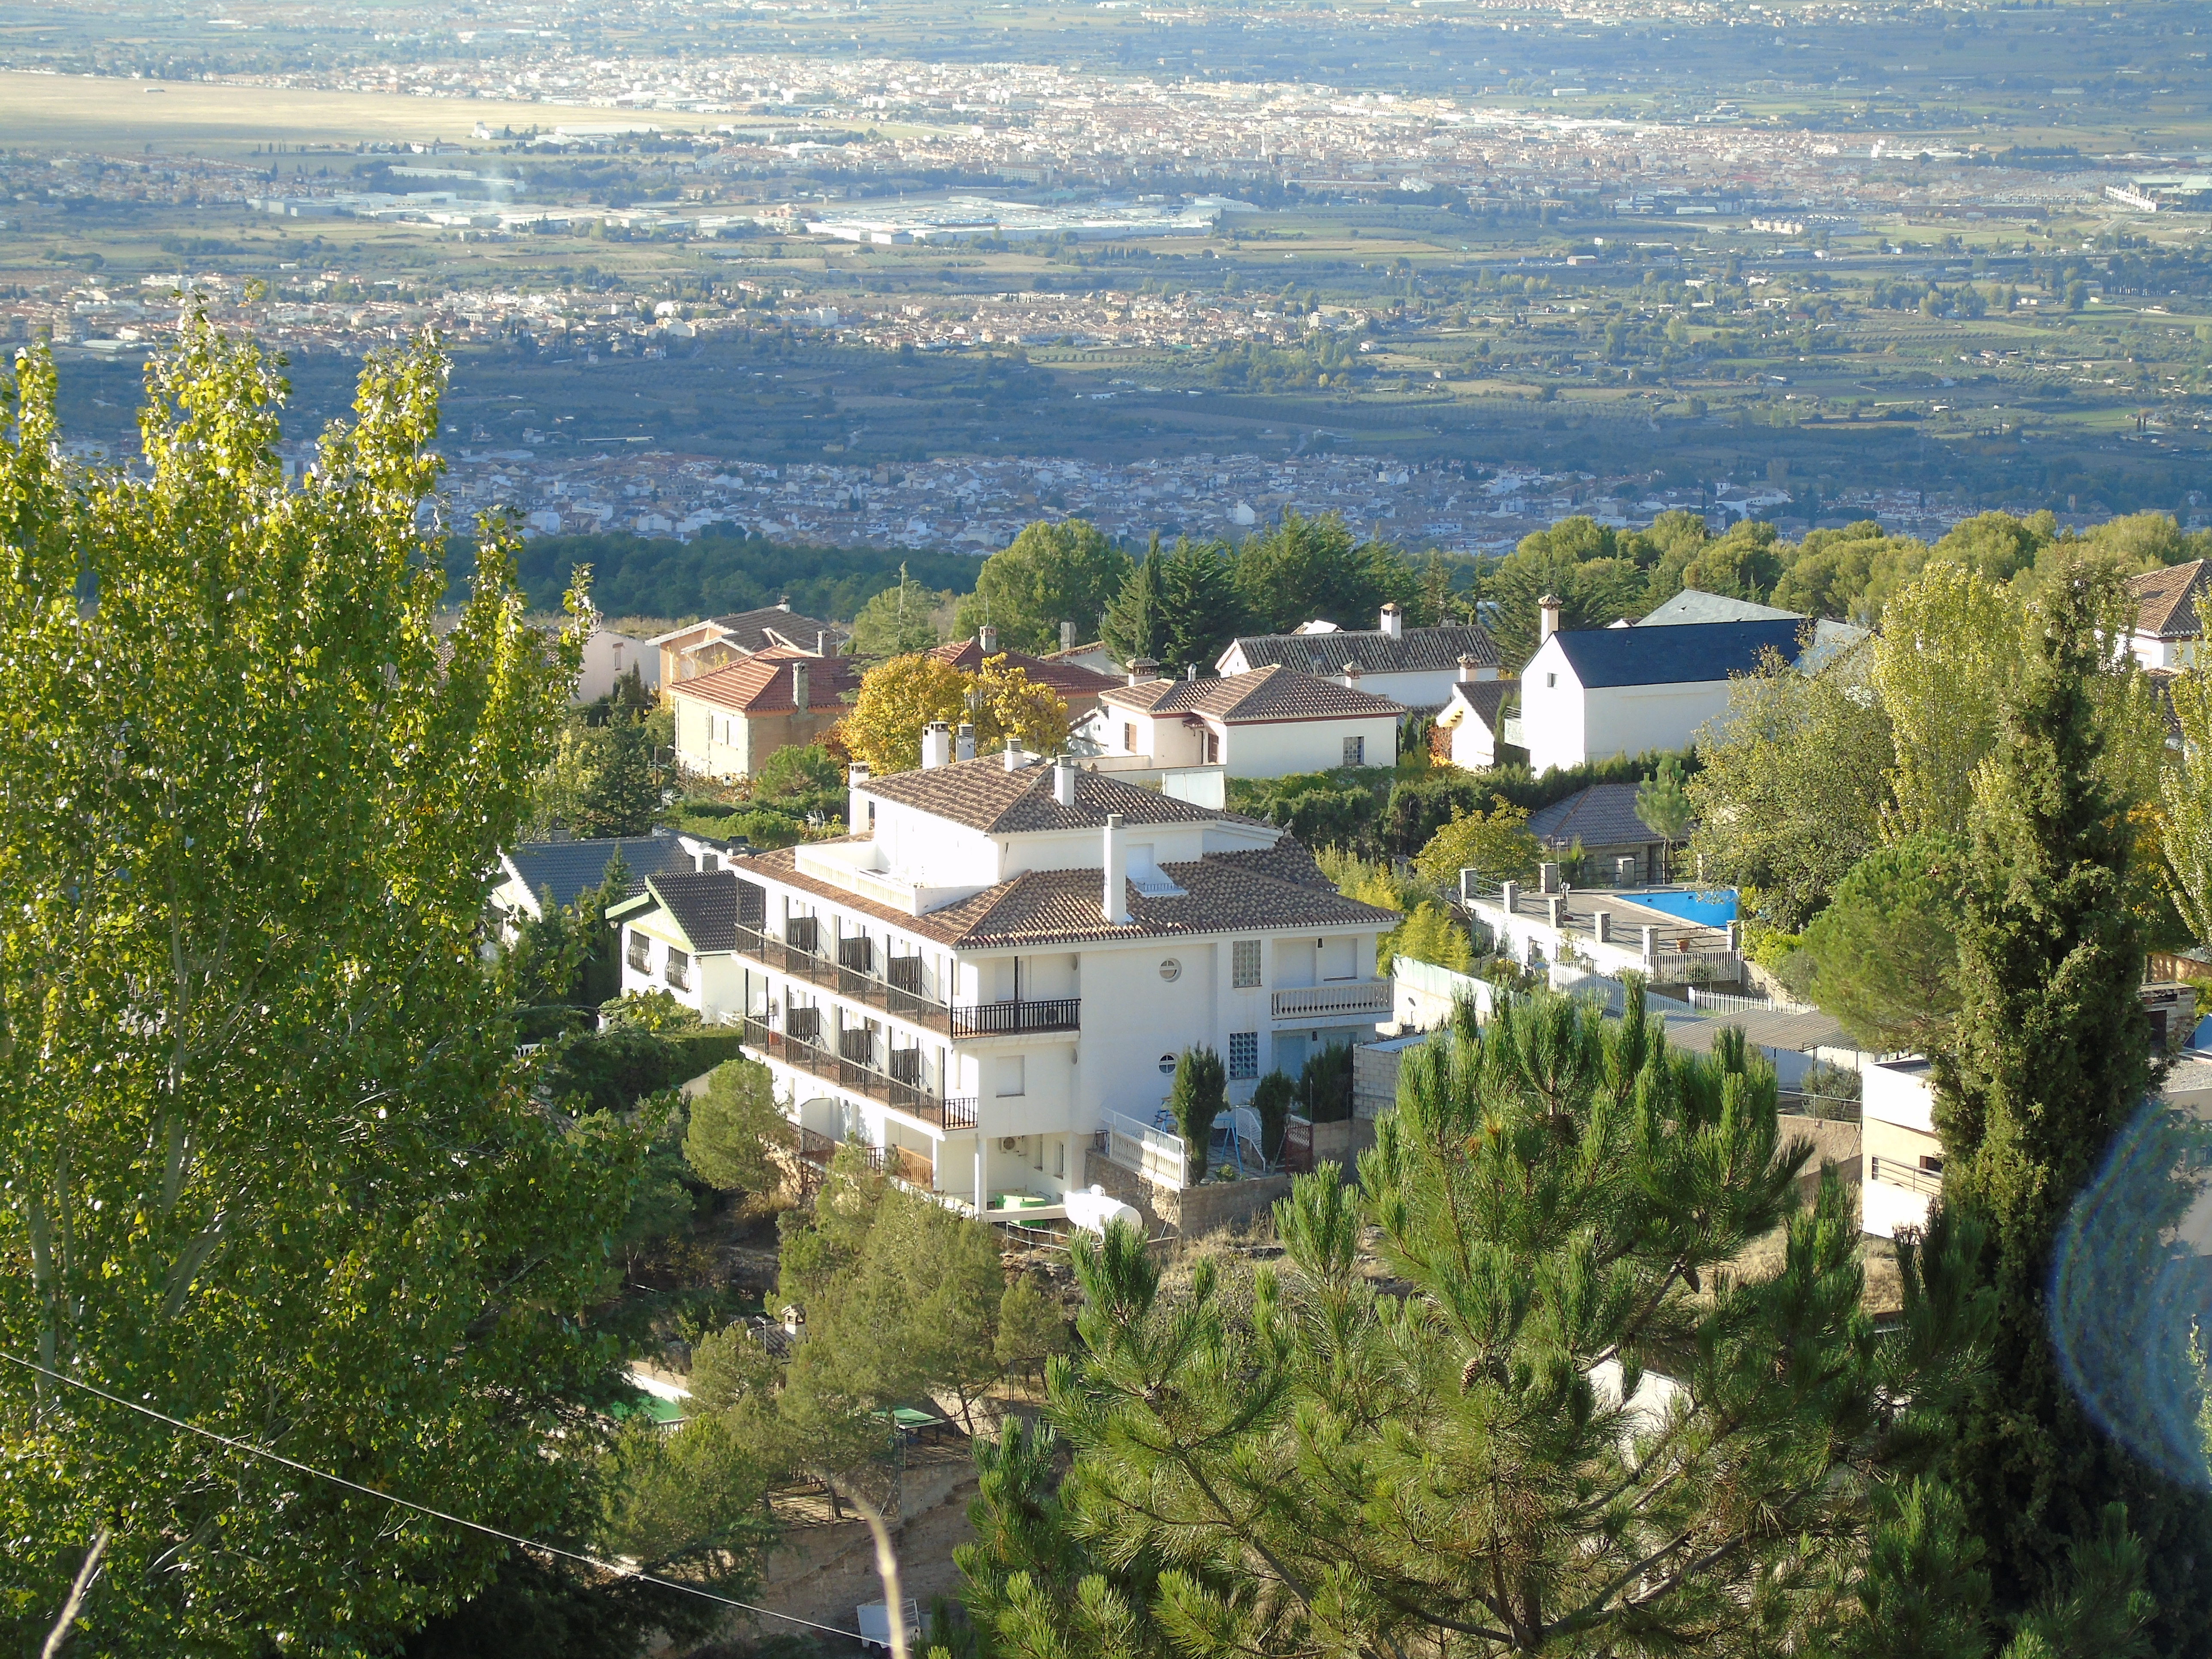 View of the apartments, in the background the city of Granada.